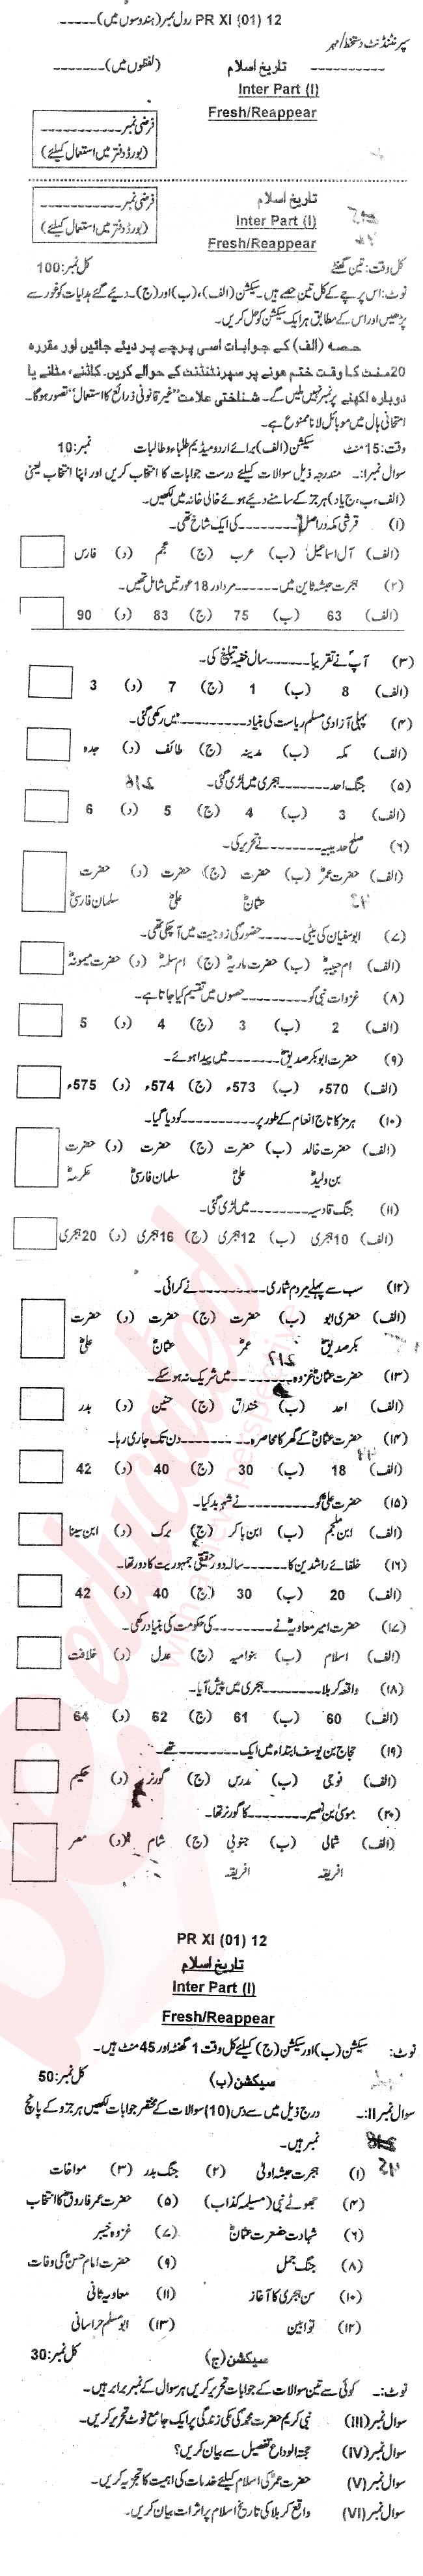 Islamic History FA Part 1 Past Paper Group 1 BISE Swat 2012